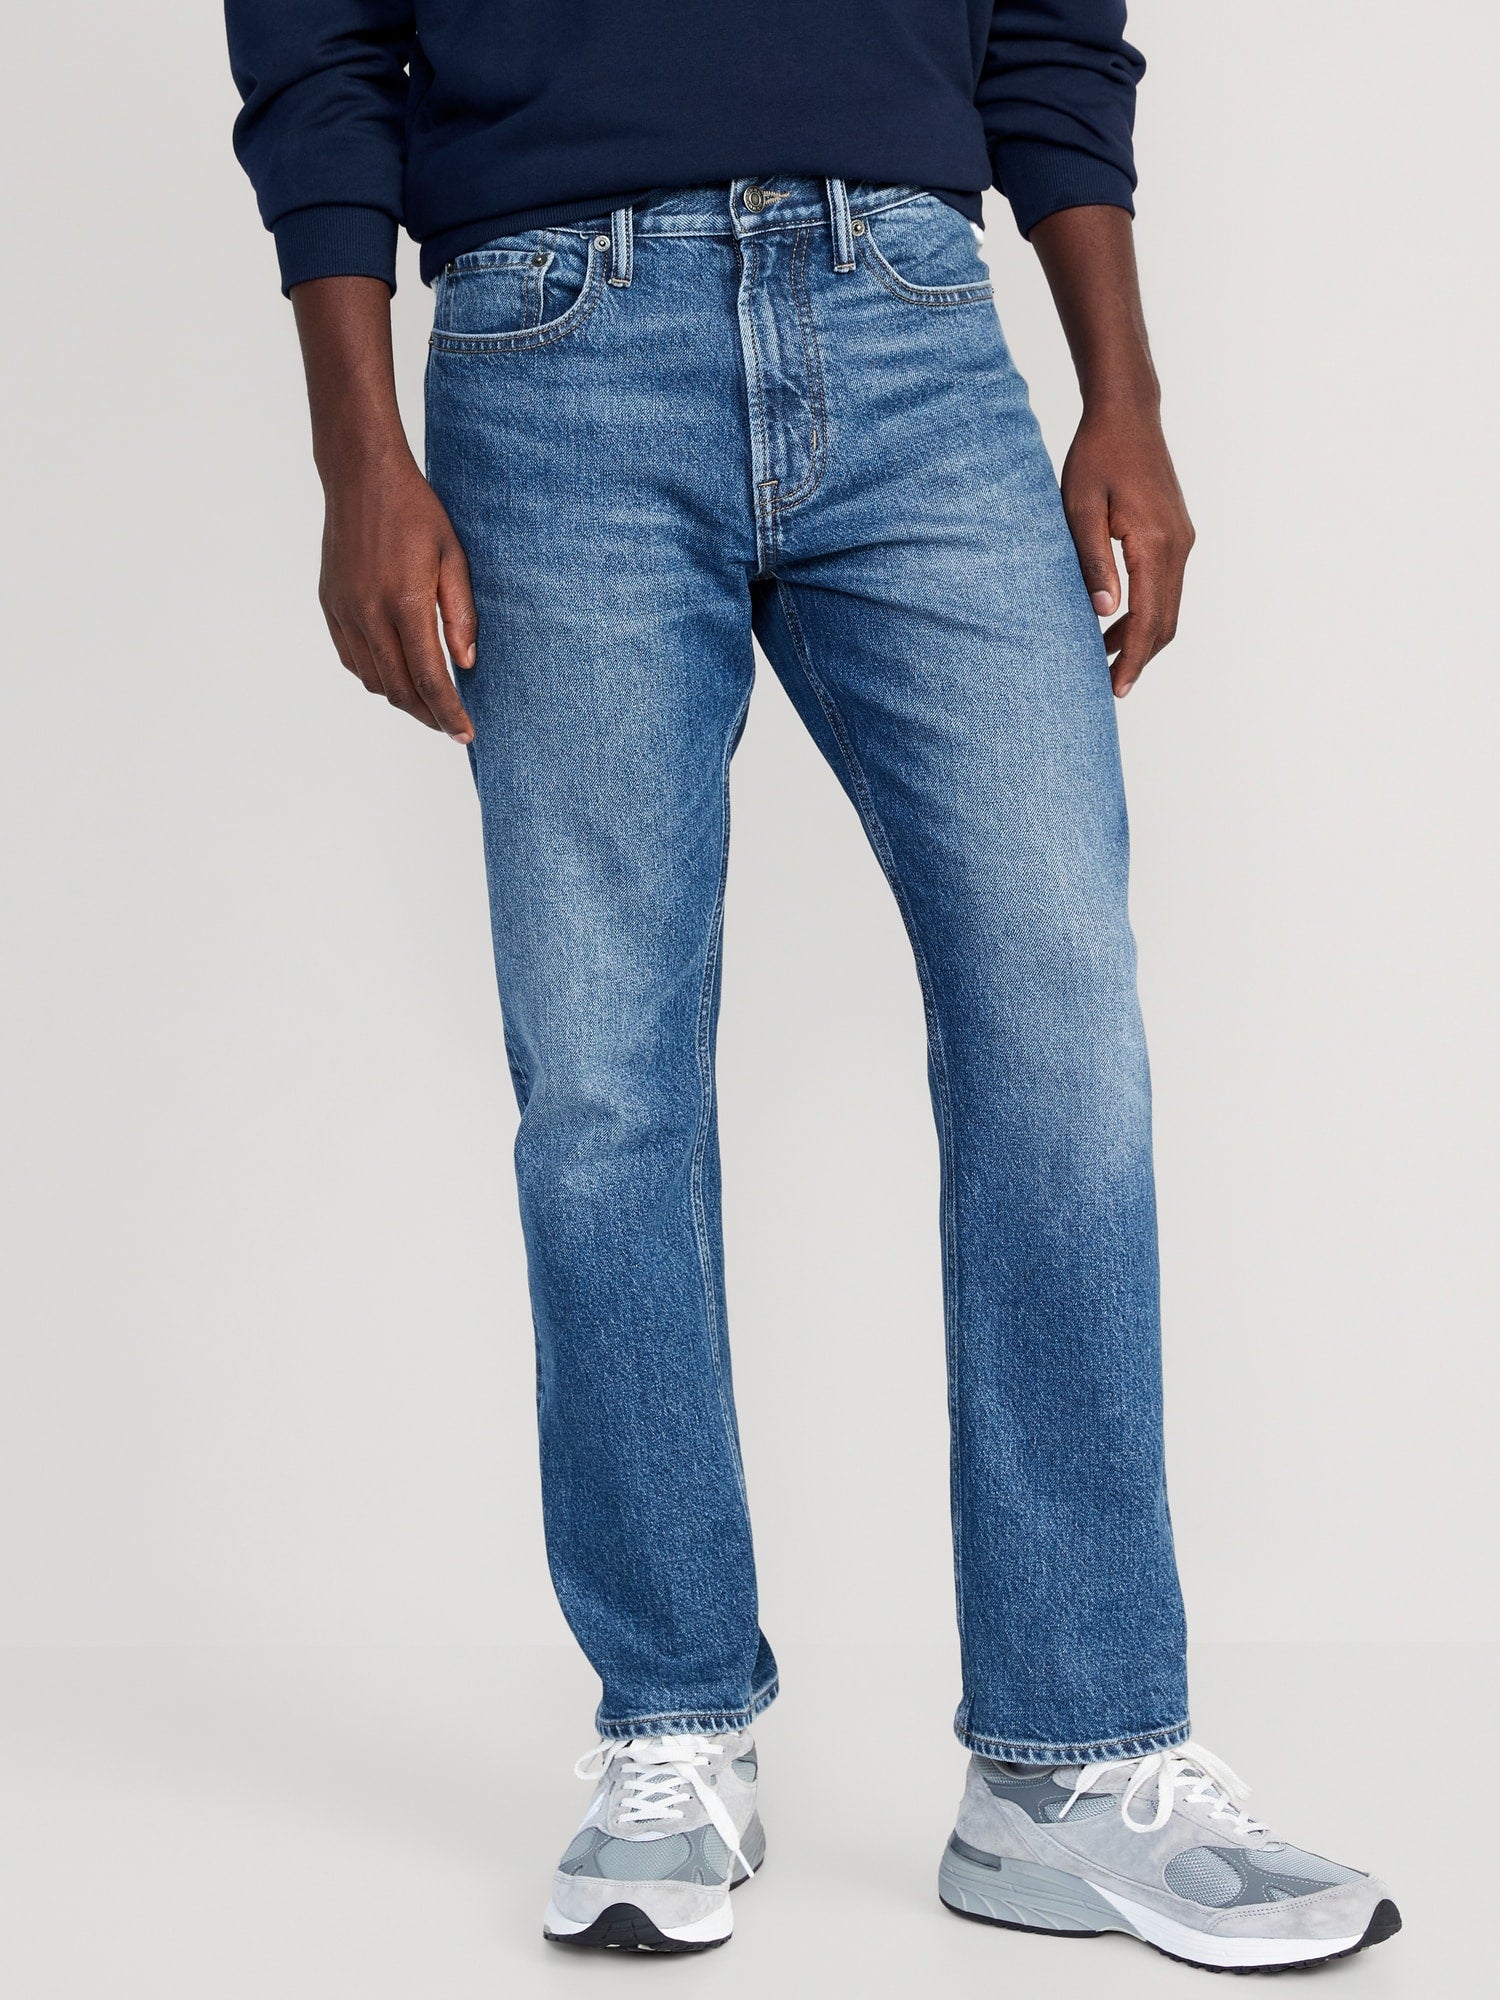 Men's Straight Jeans - Old Navy Philippines